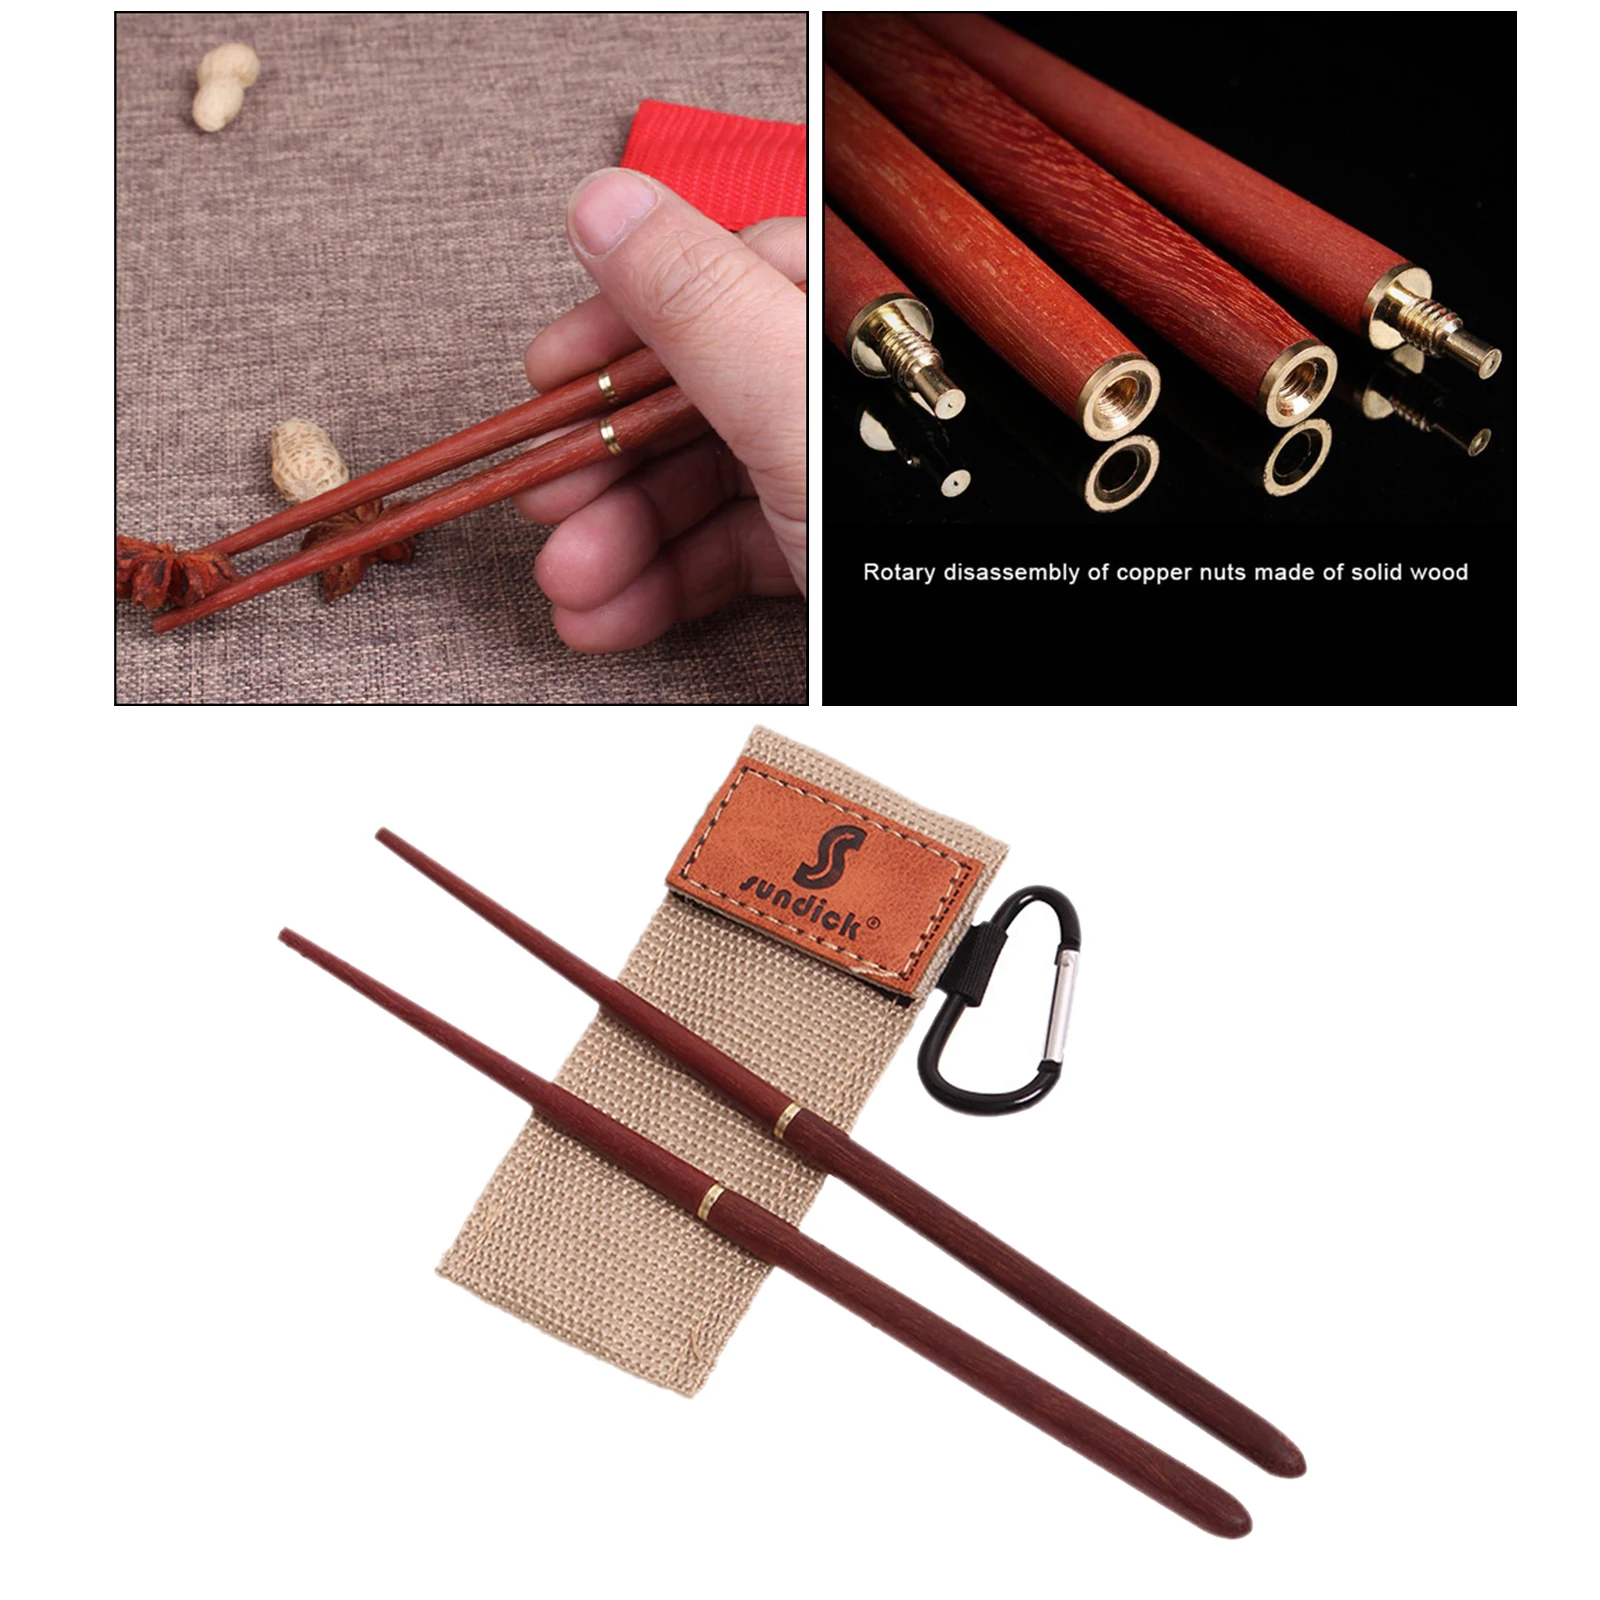 1 Pair Collapsible Wooden Chopsticks Portable Tableware - for Picnic Camping Office Travel